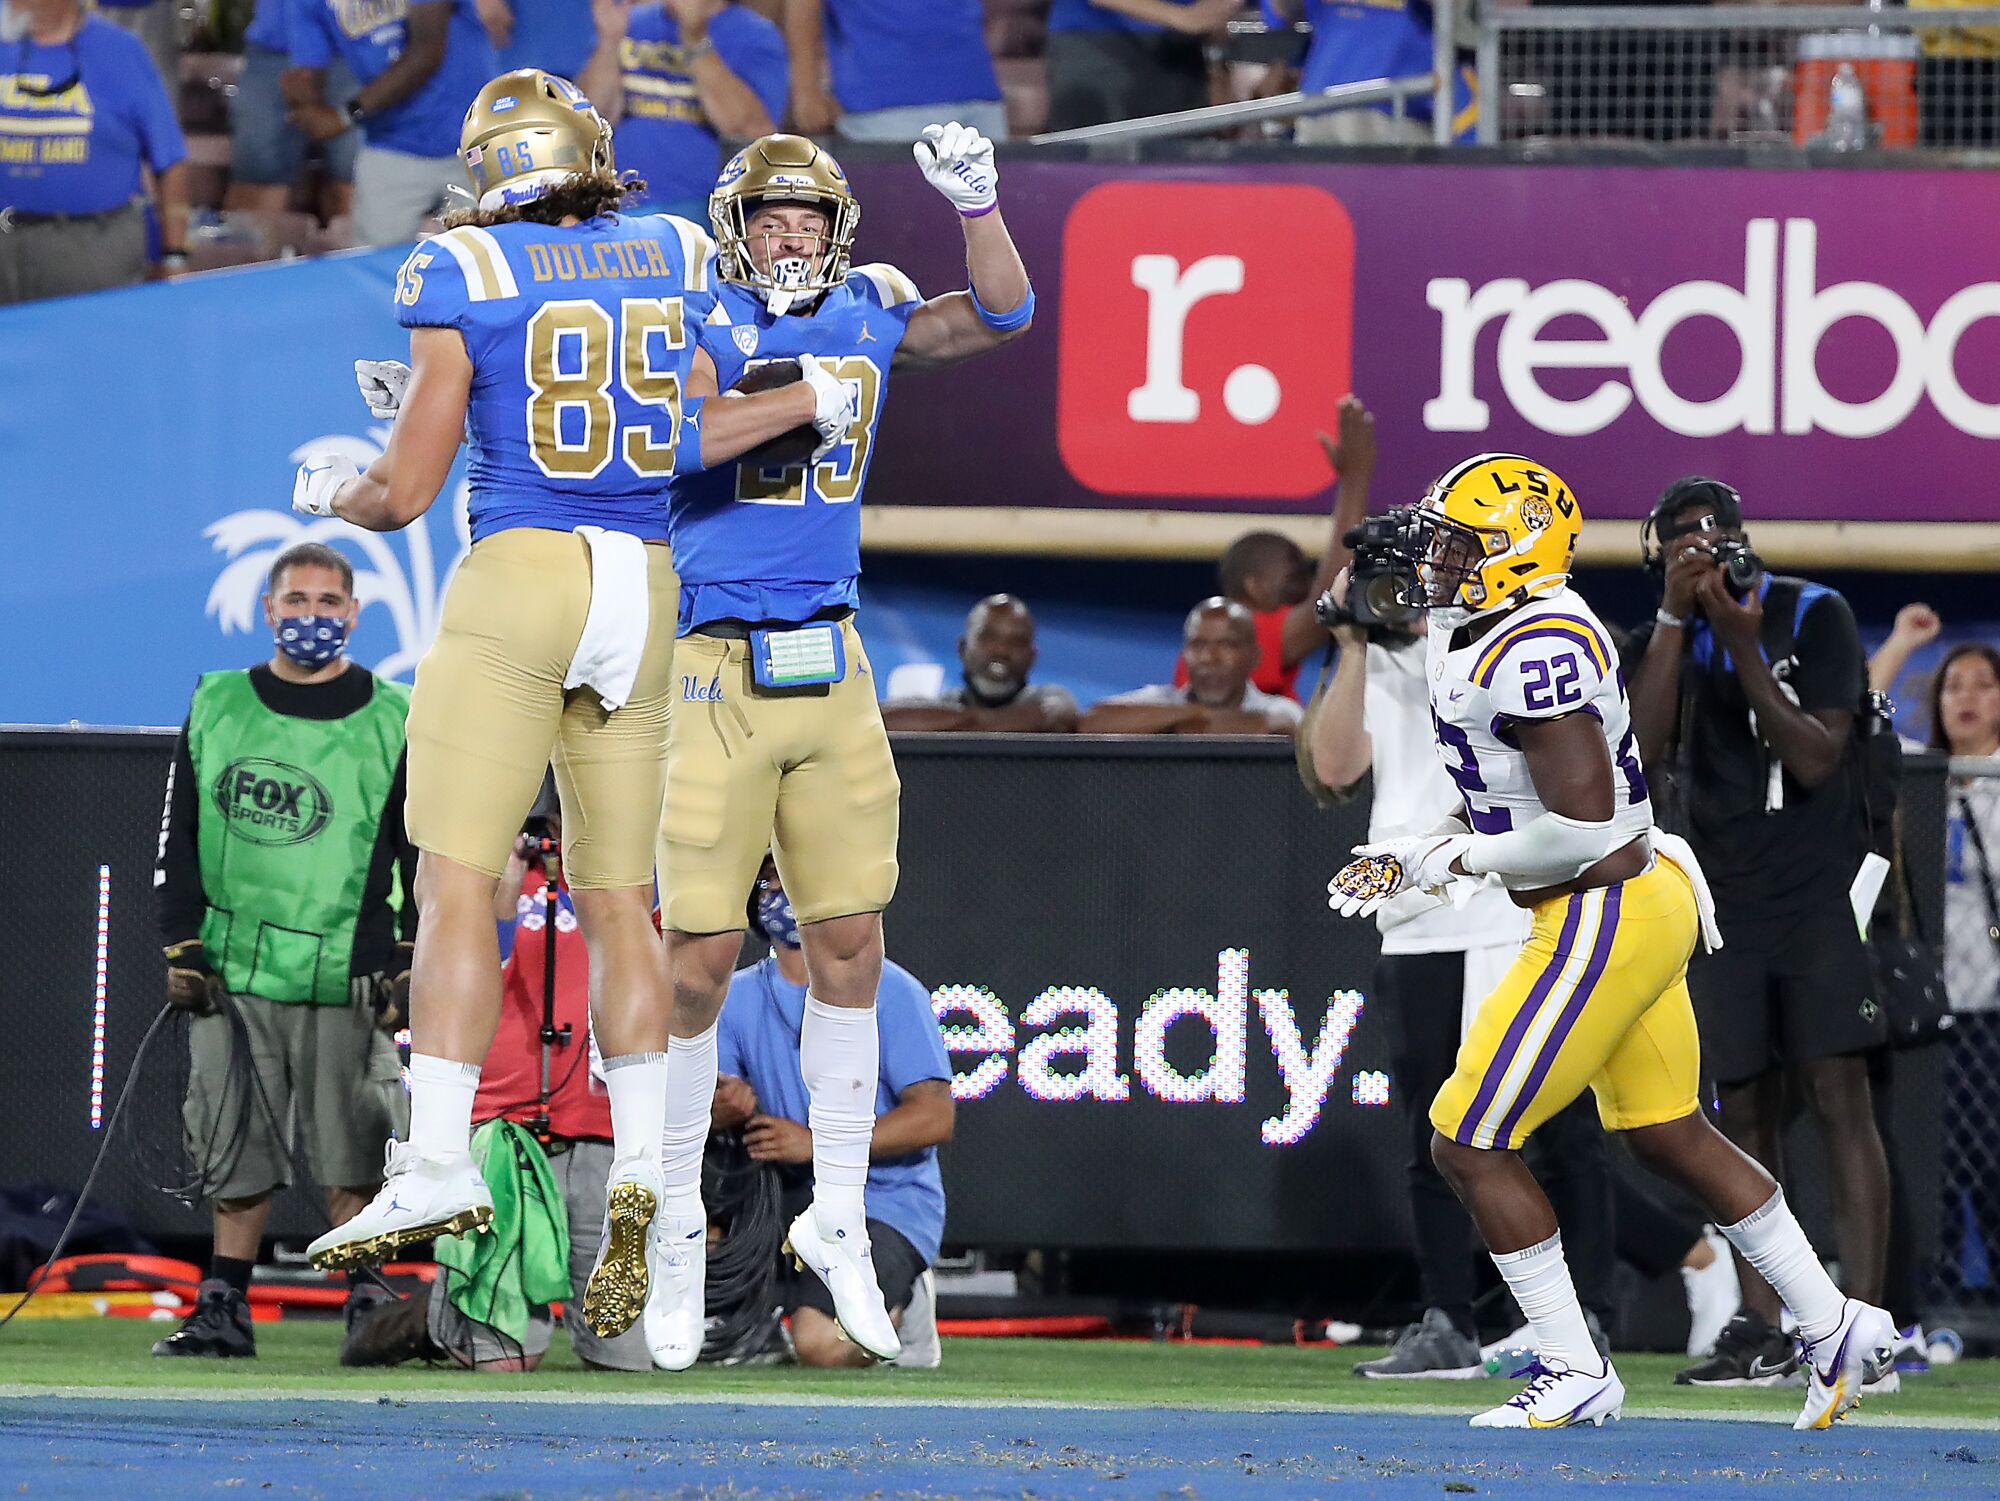  UCLA wide receiver Chase Cota (23) is congratulated by teammate Greg Dulcich.